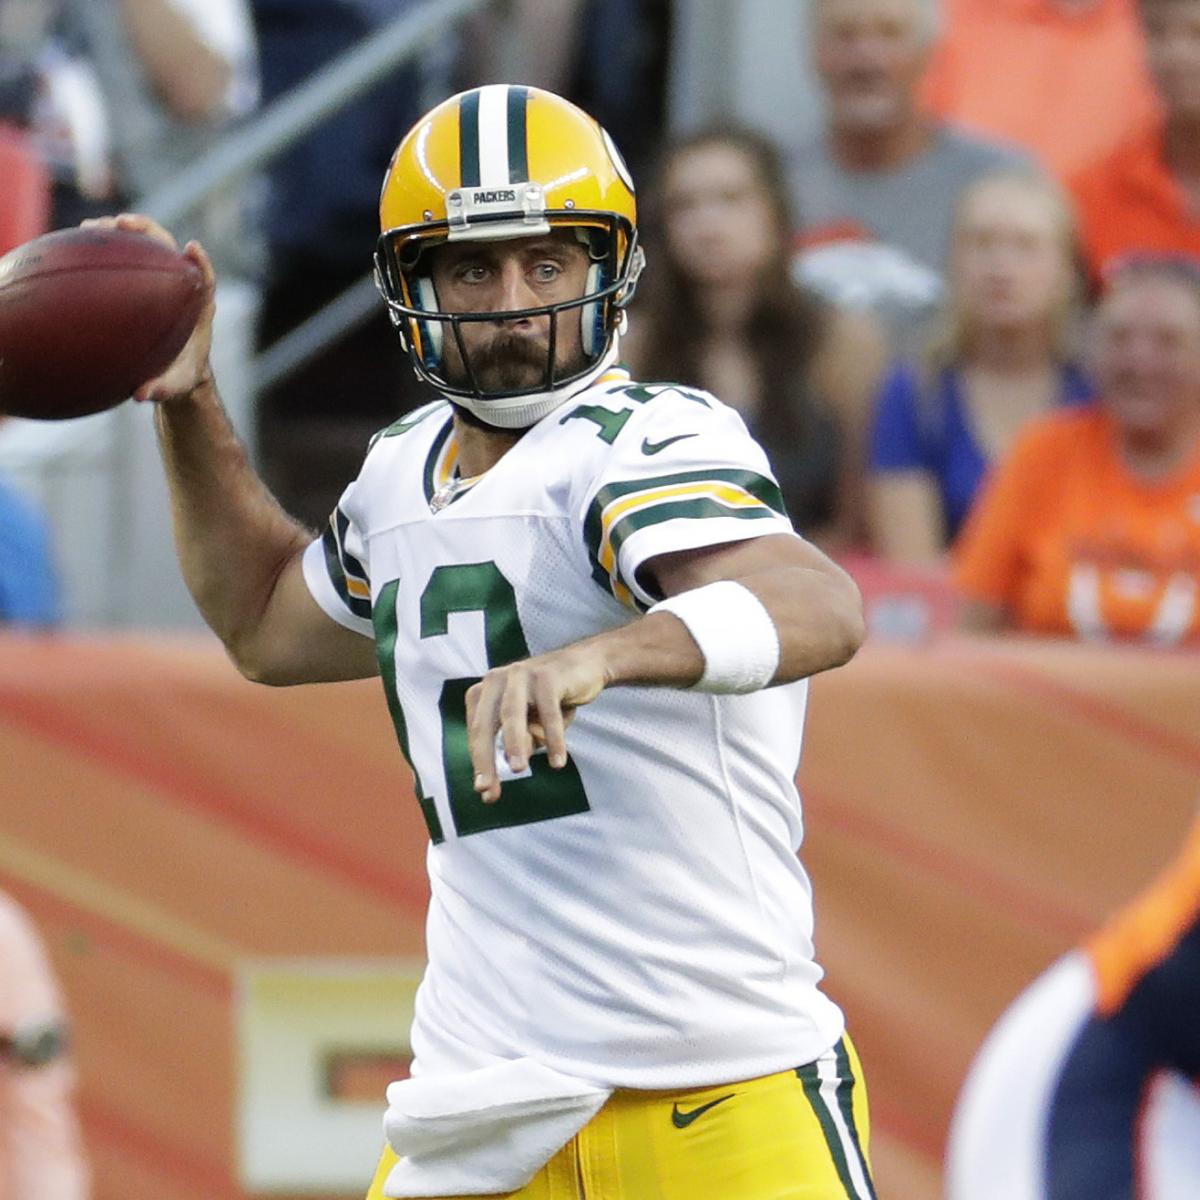 Trey Lance is a 49ers bust, Aaron Rodgers can't save the Packers